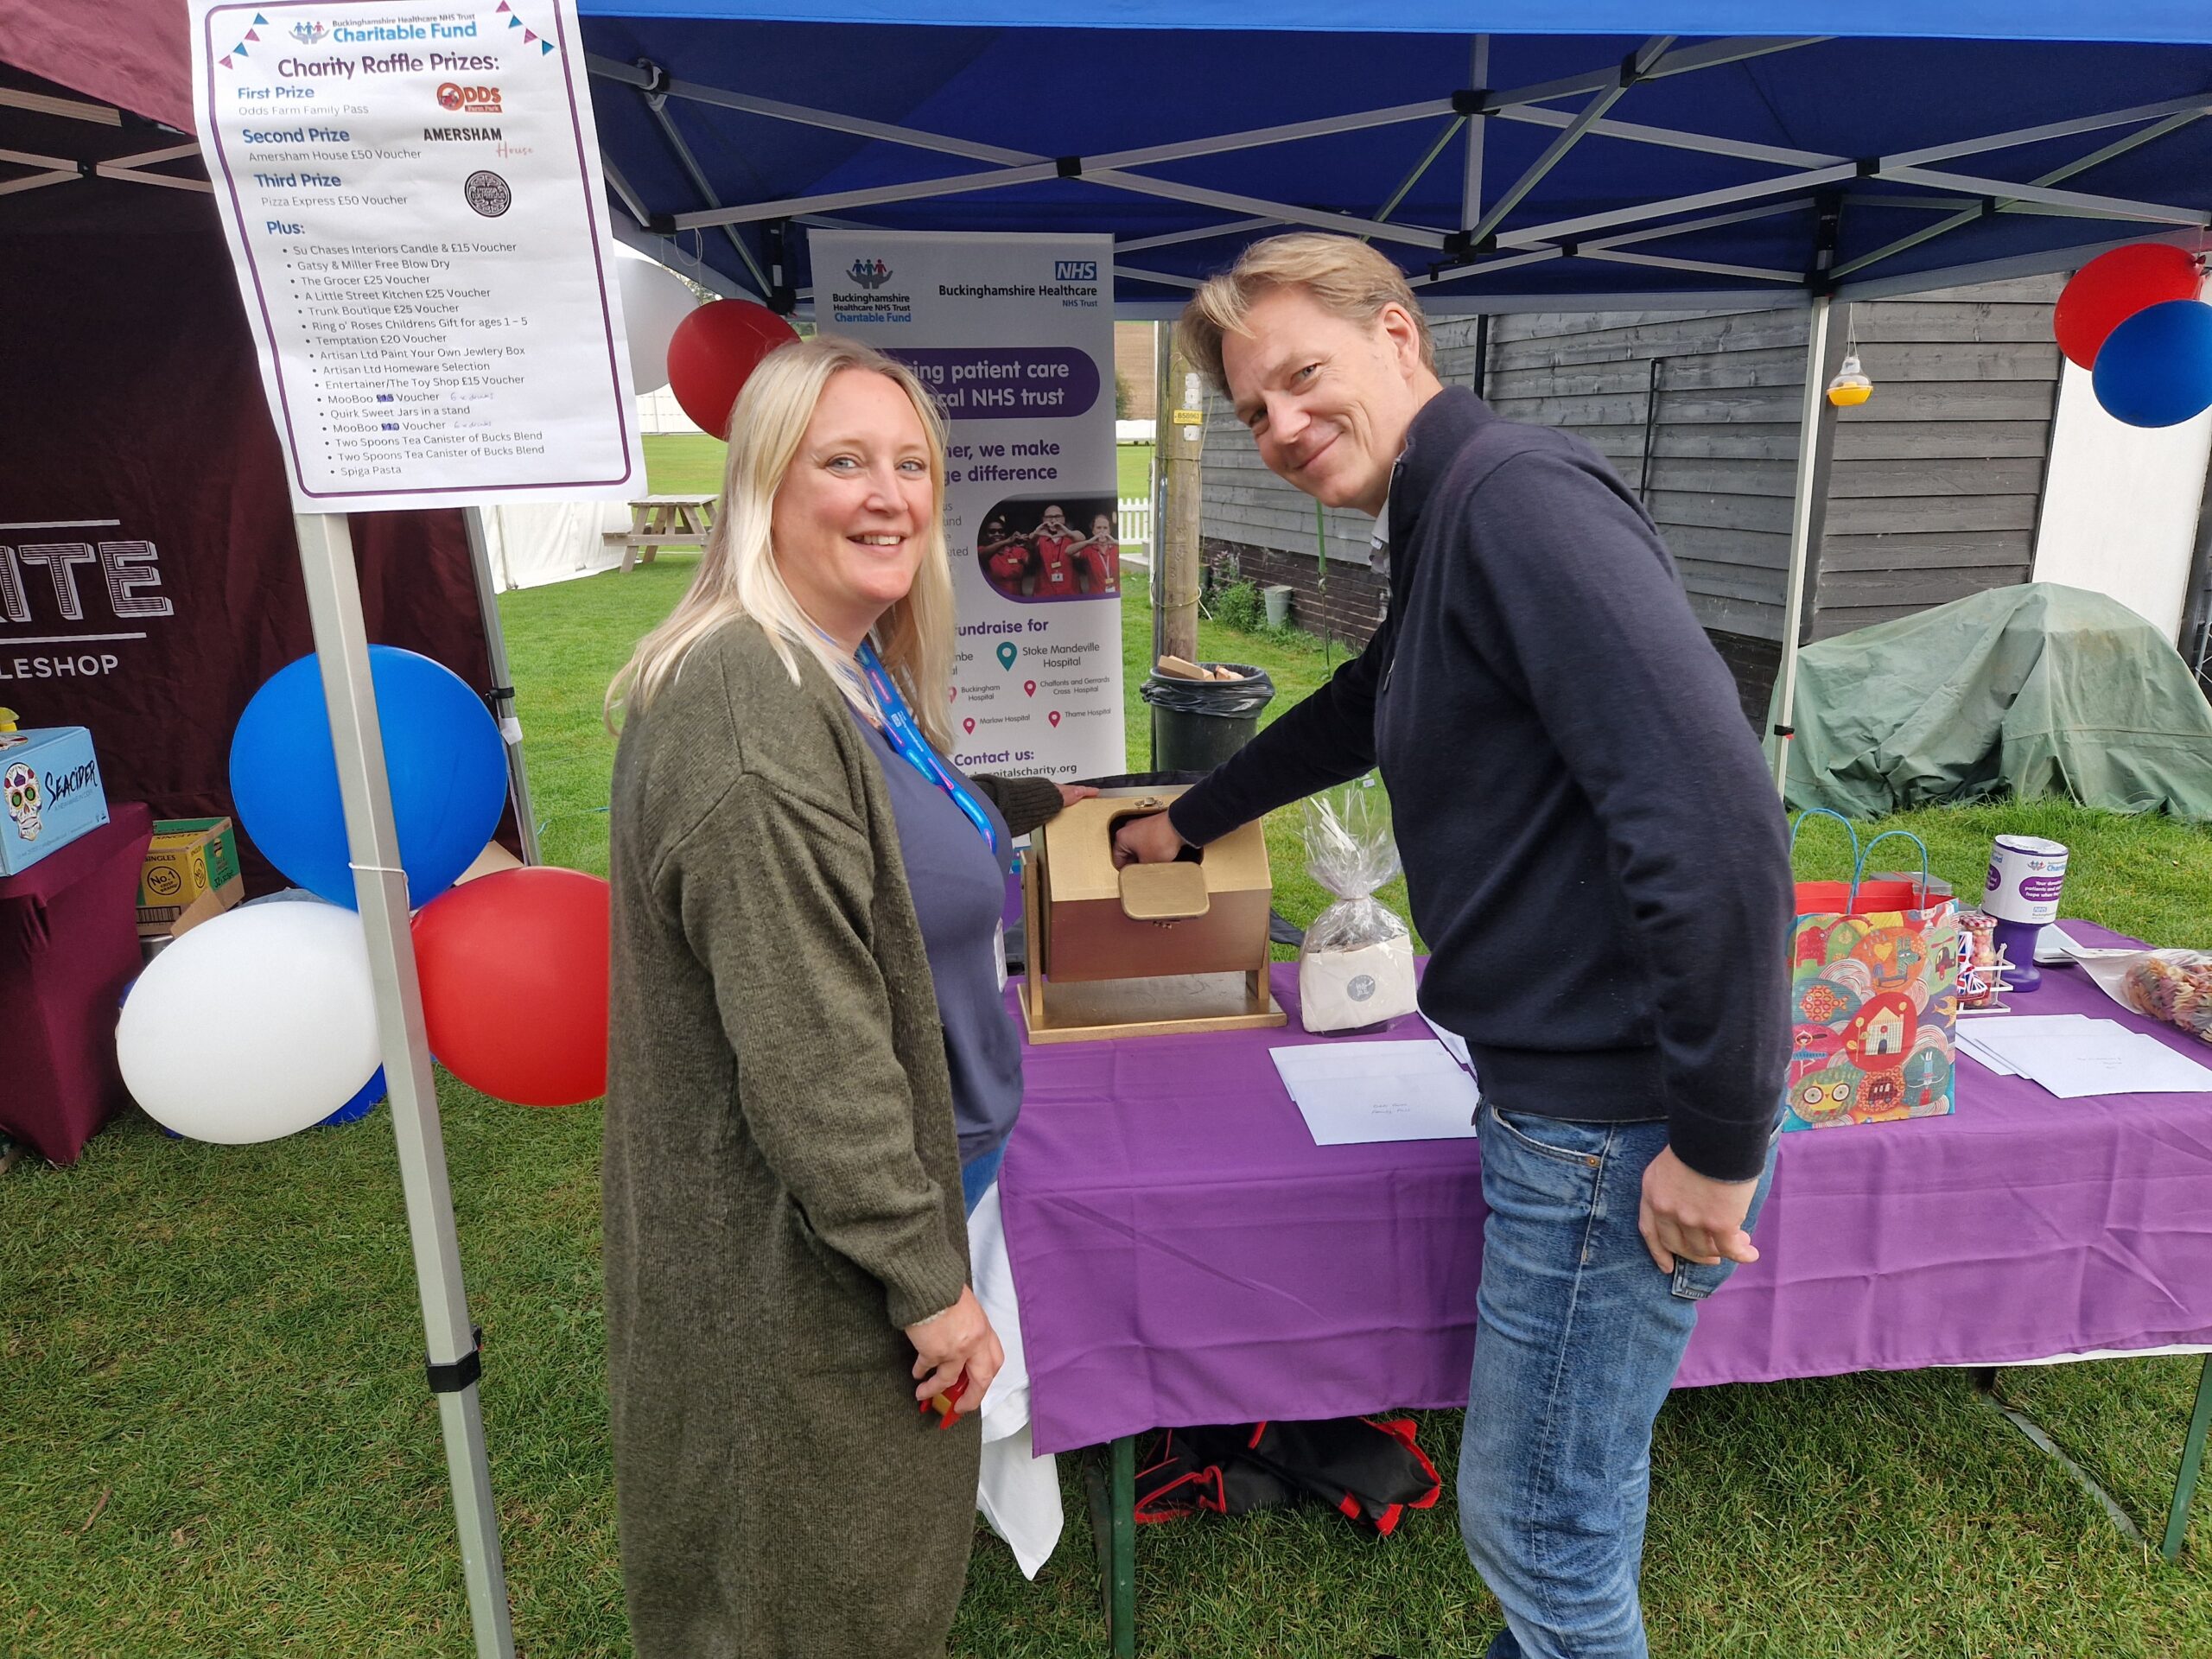 Sophie from the Charity and Mark from Amersham Community Board drawing a raffle ticket whilst looking towards the camera.